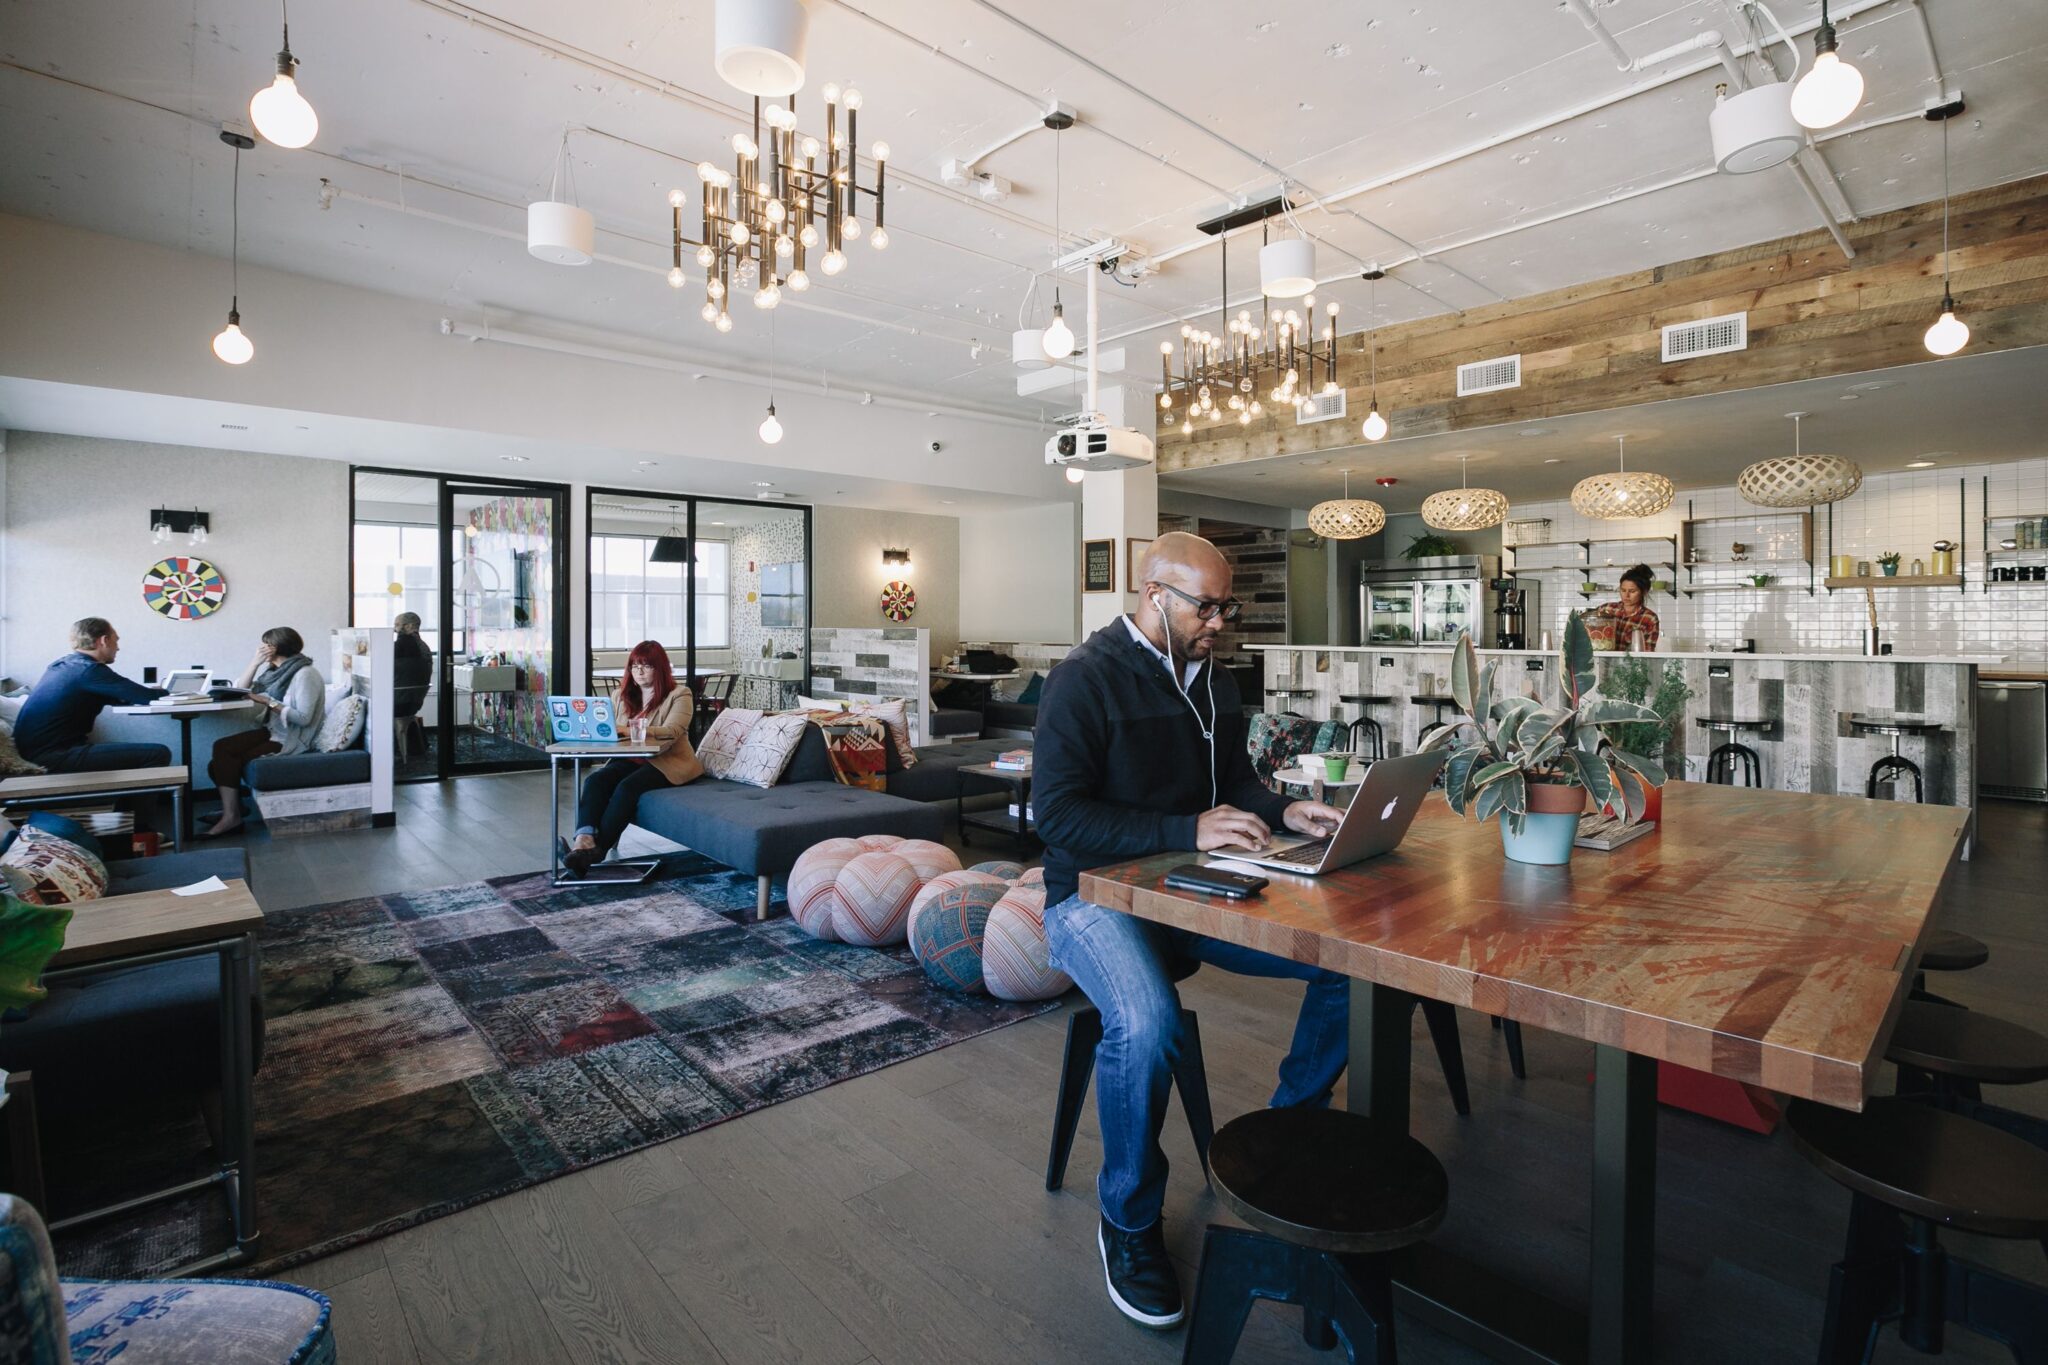 Impact Of Design On Productivity In Coworking Environments